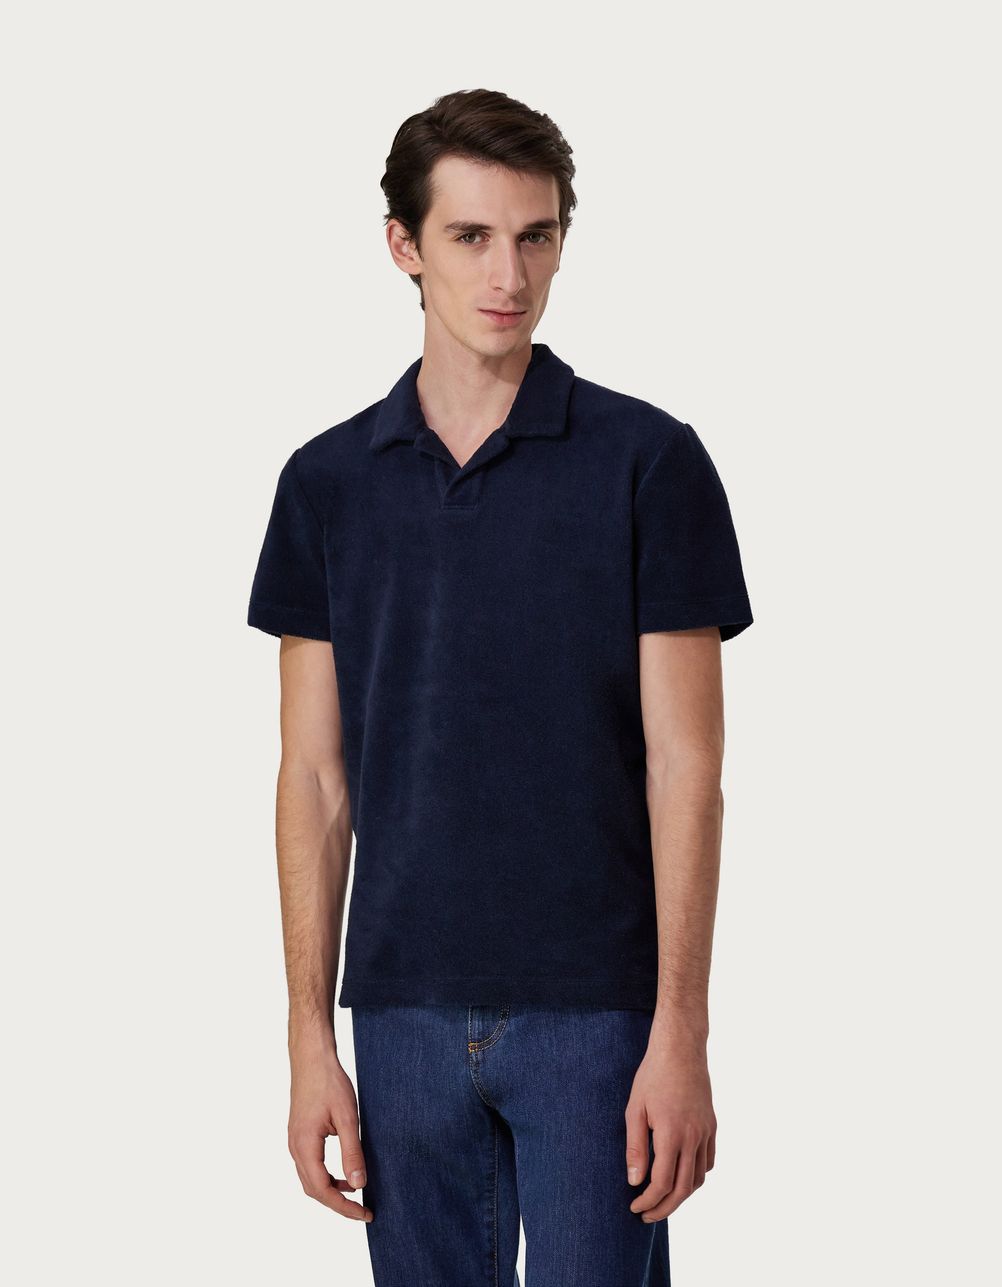 Navy blue polo shirt in garment-dyed cotton terry